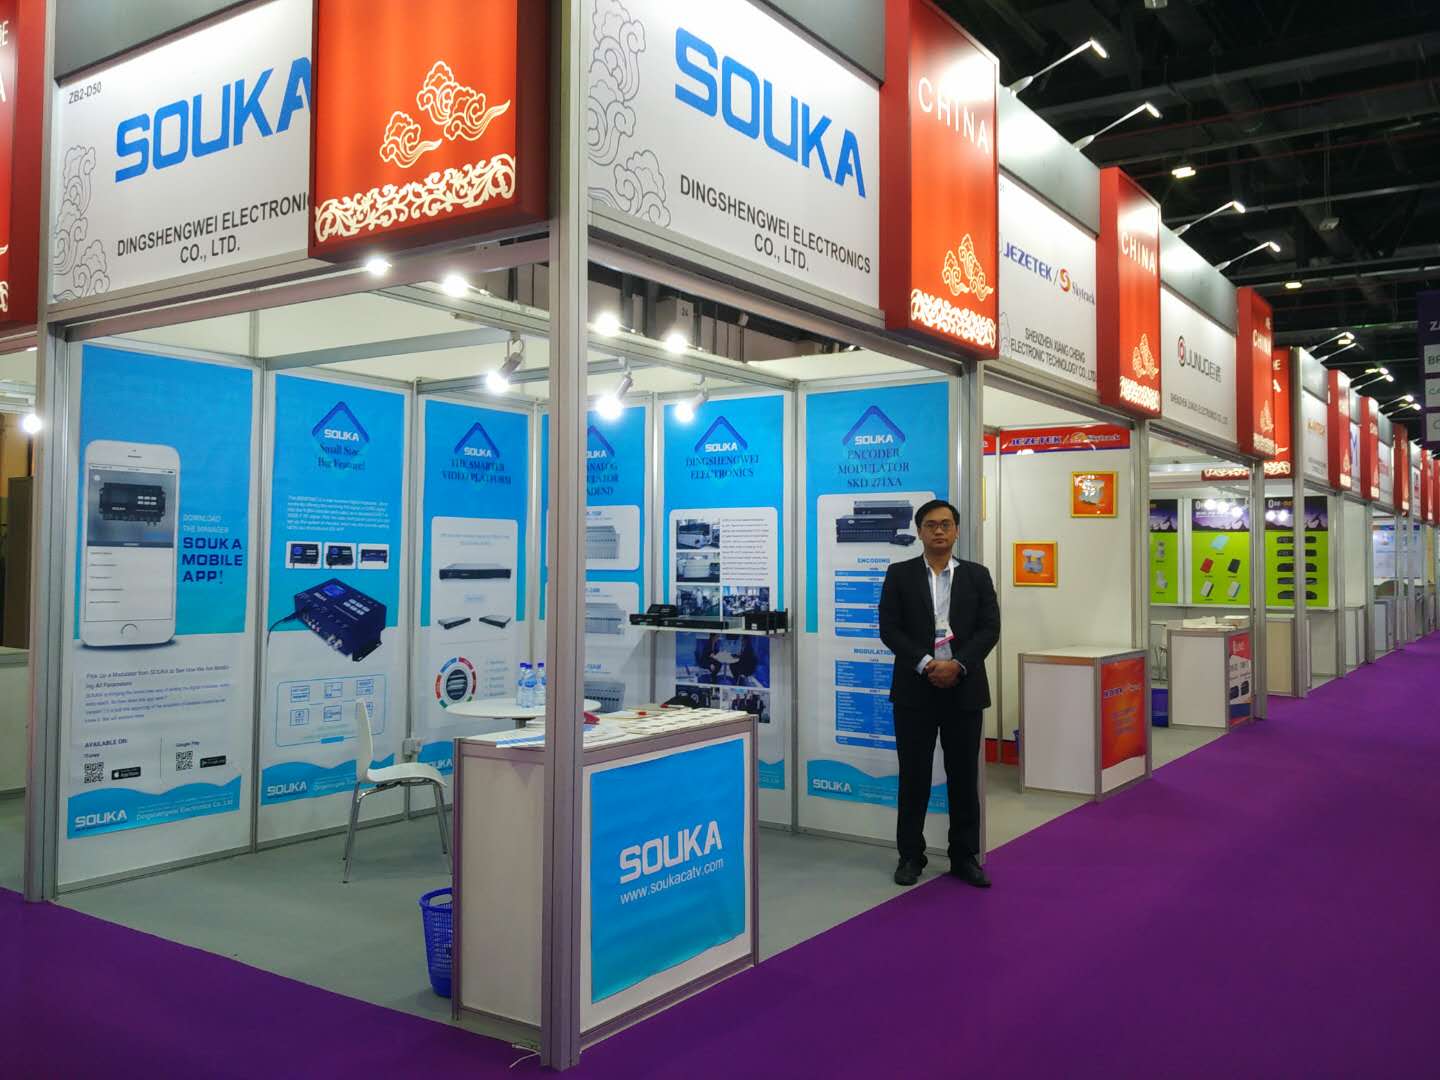 SOUKA's Booth in CABSAT